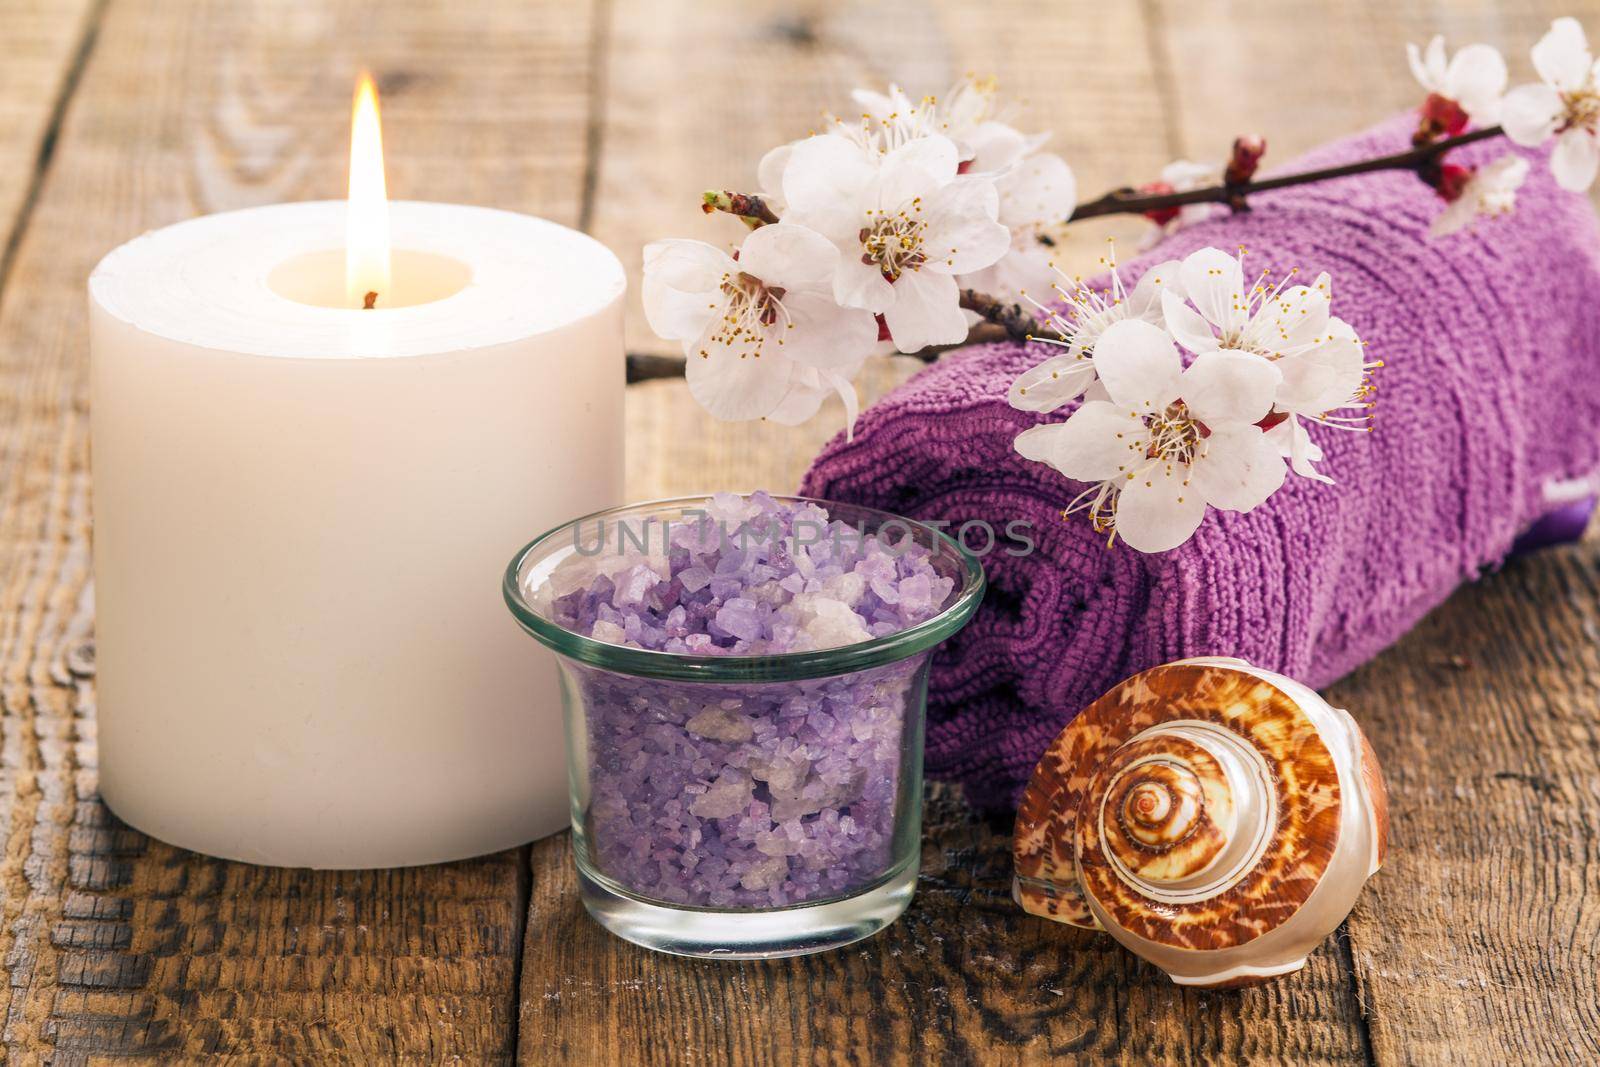 Sea salt in glass bowl with towel for bathroom procedures, sea shell and burning candle with flowering branch of apricot tree on the background. Spa products and accessories